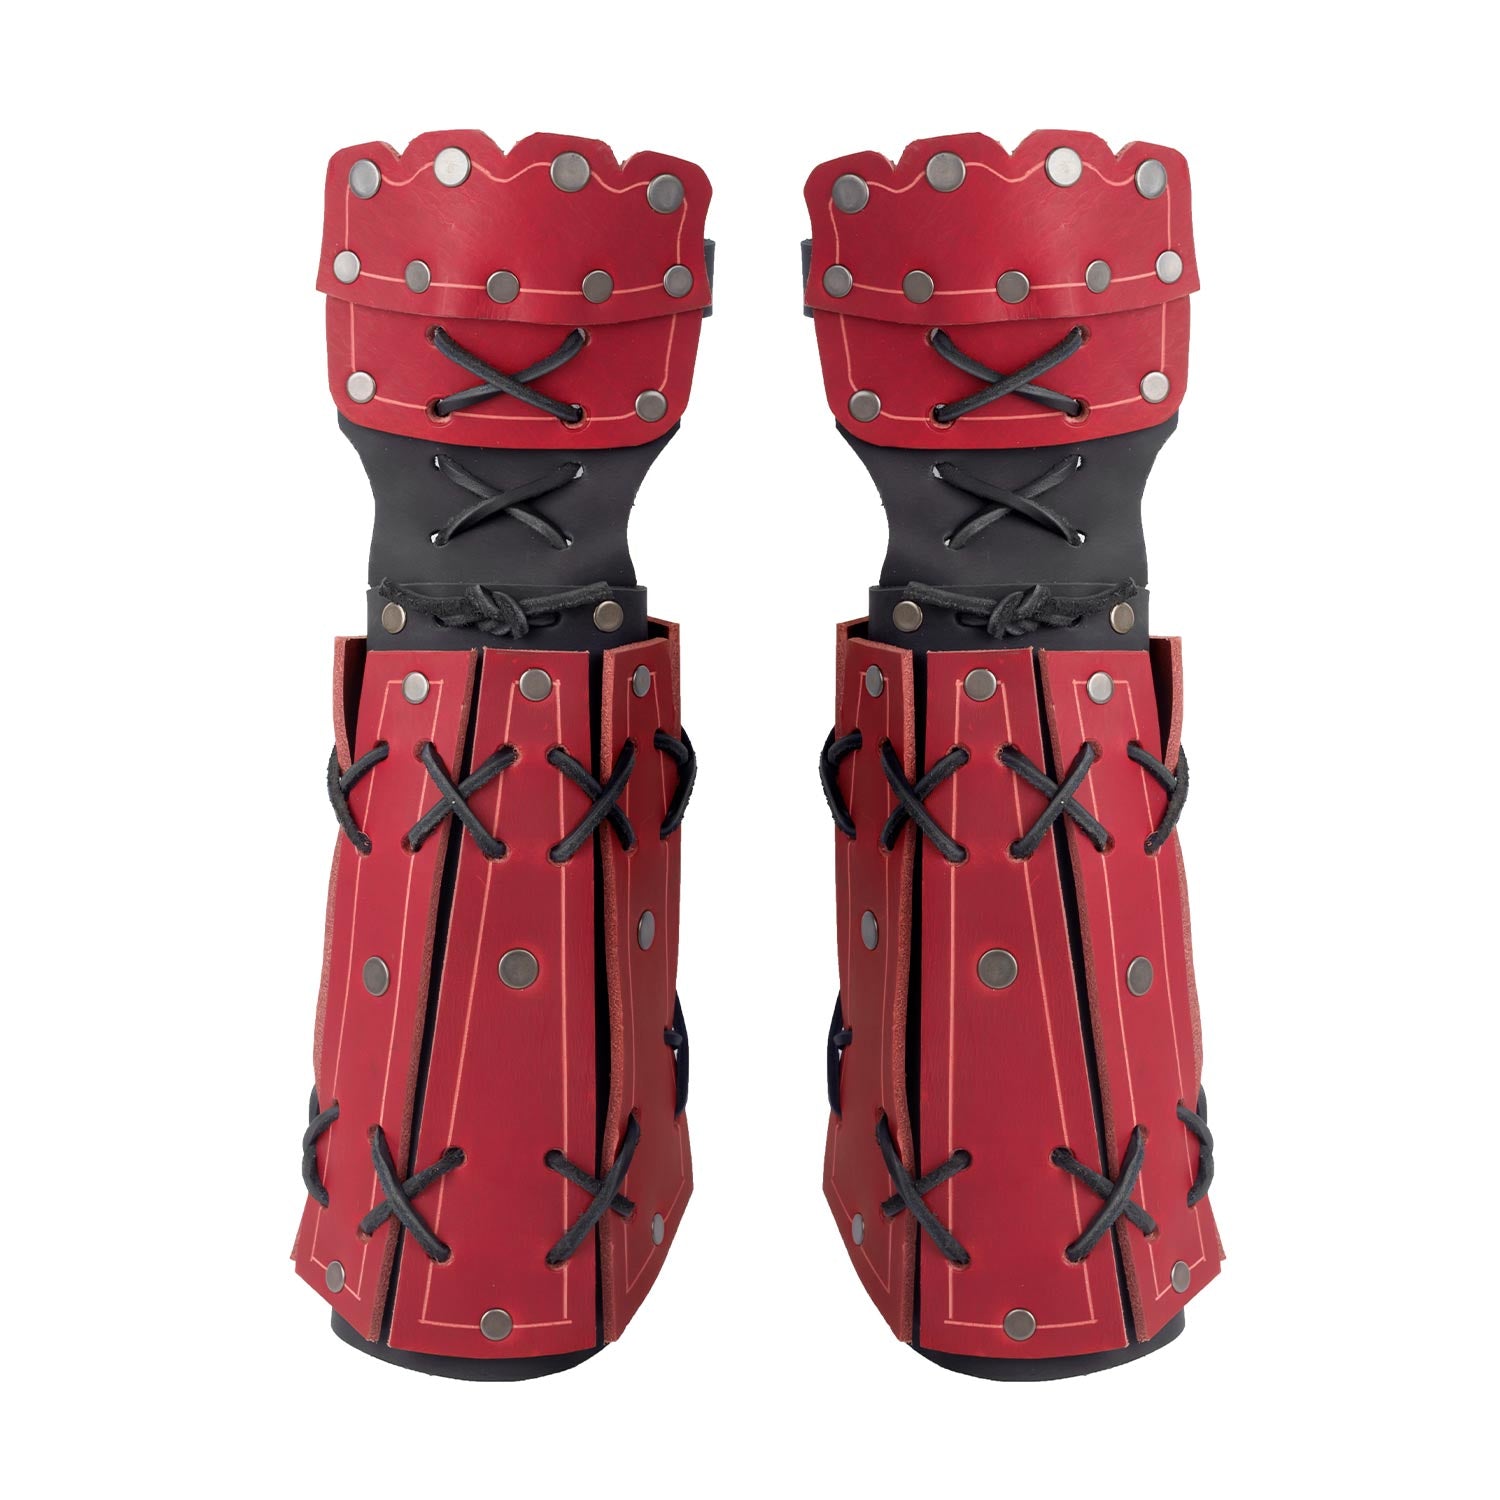 Apocalyptic Samurai Leather Bracers, Burning Man, Larp or Cosplay Pair of  Bracers for Fantasy Cosplay -  Canada